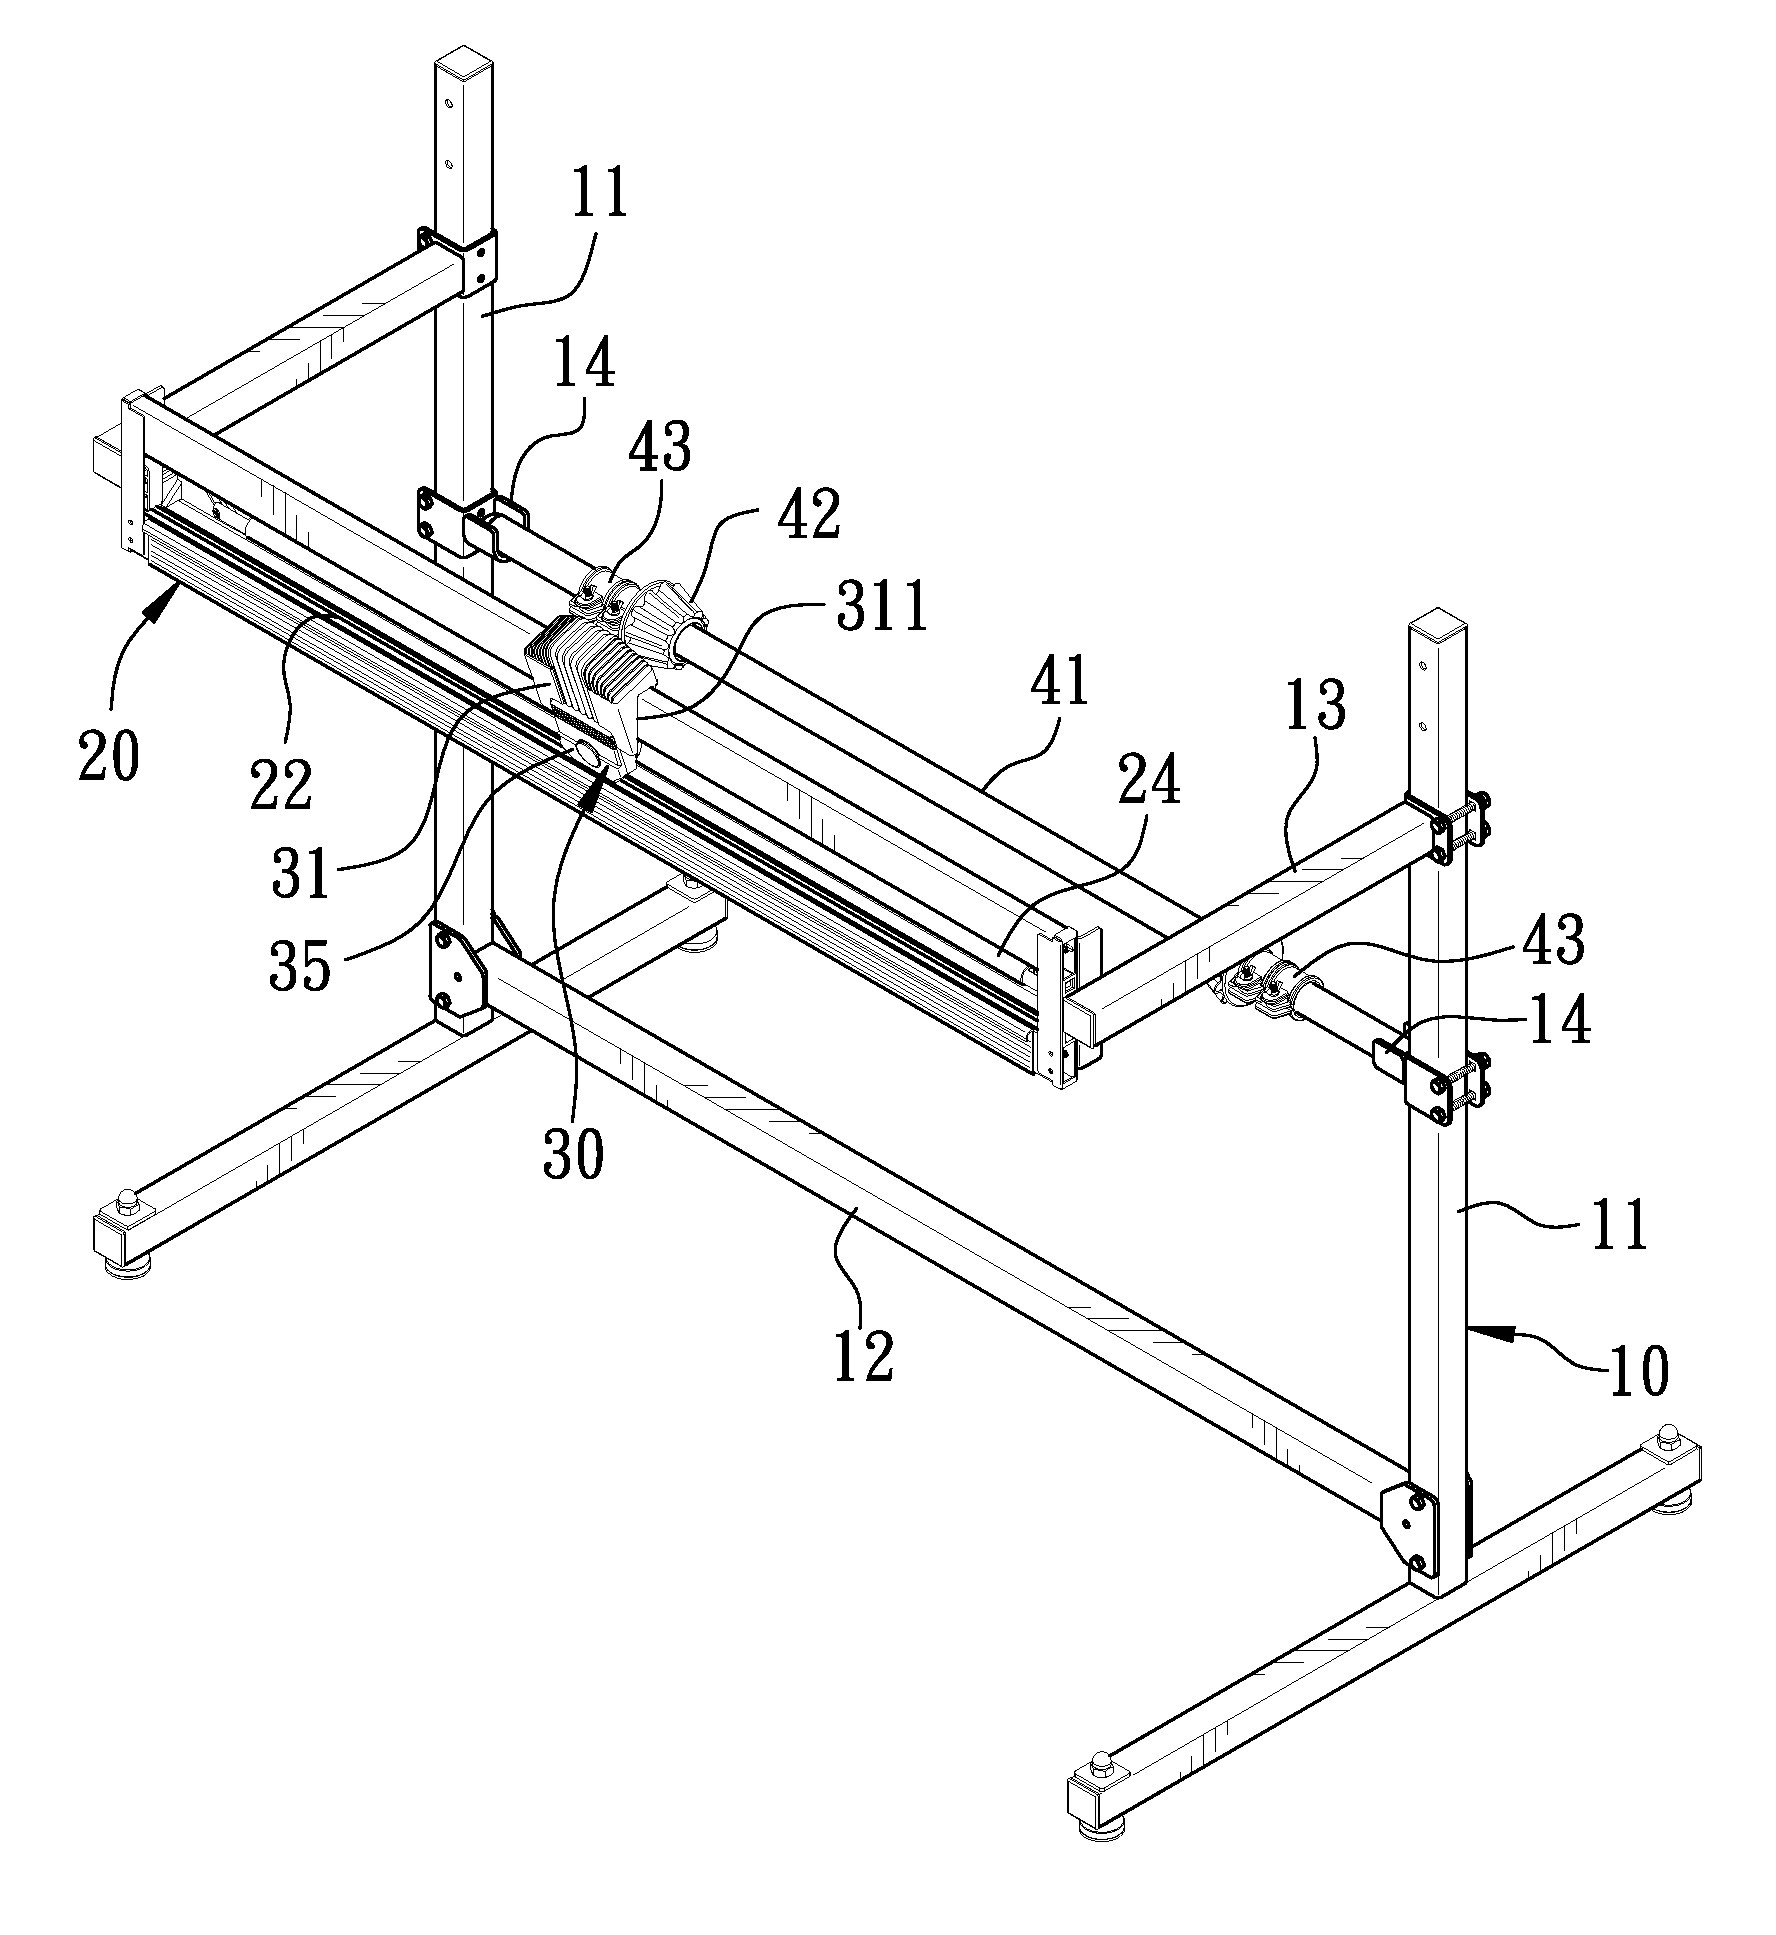 Cutter for cutting a coiled band